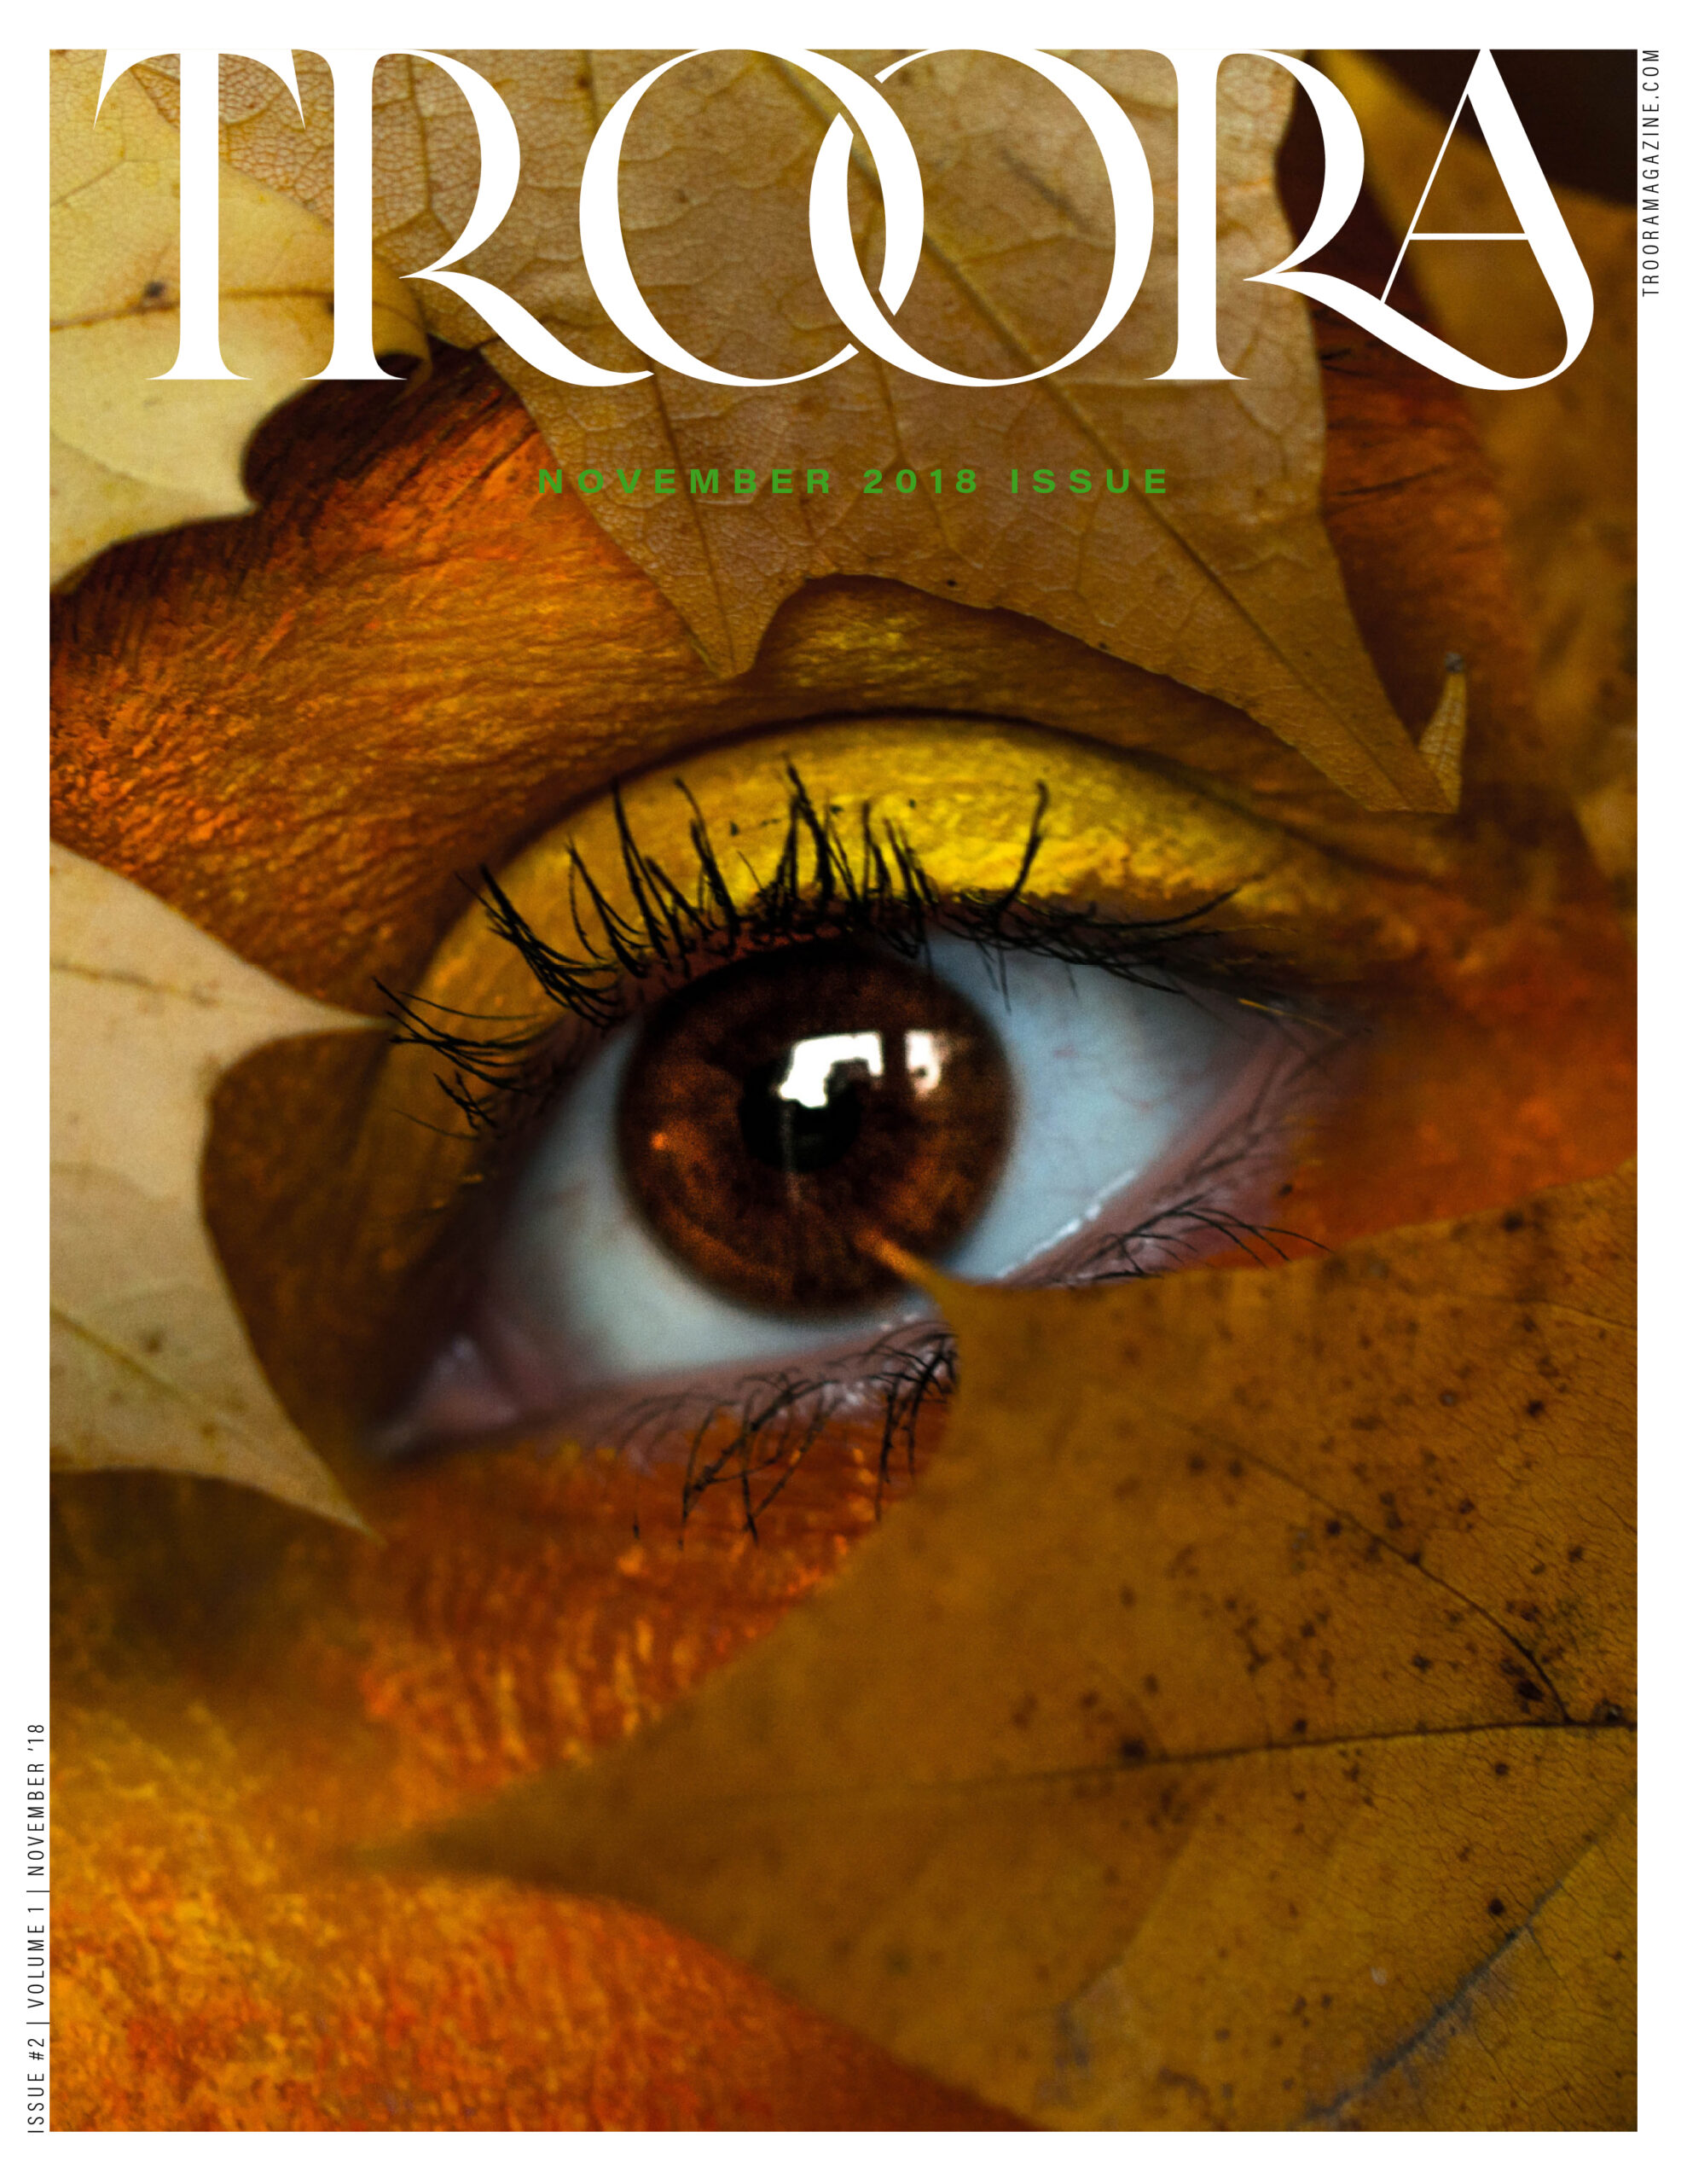 15. Second Issue Nov 2018 TROORA COVERS 110 scaled